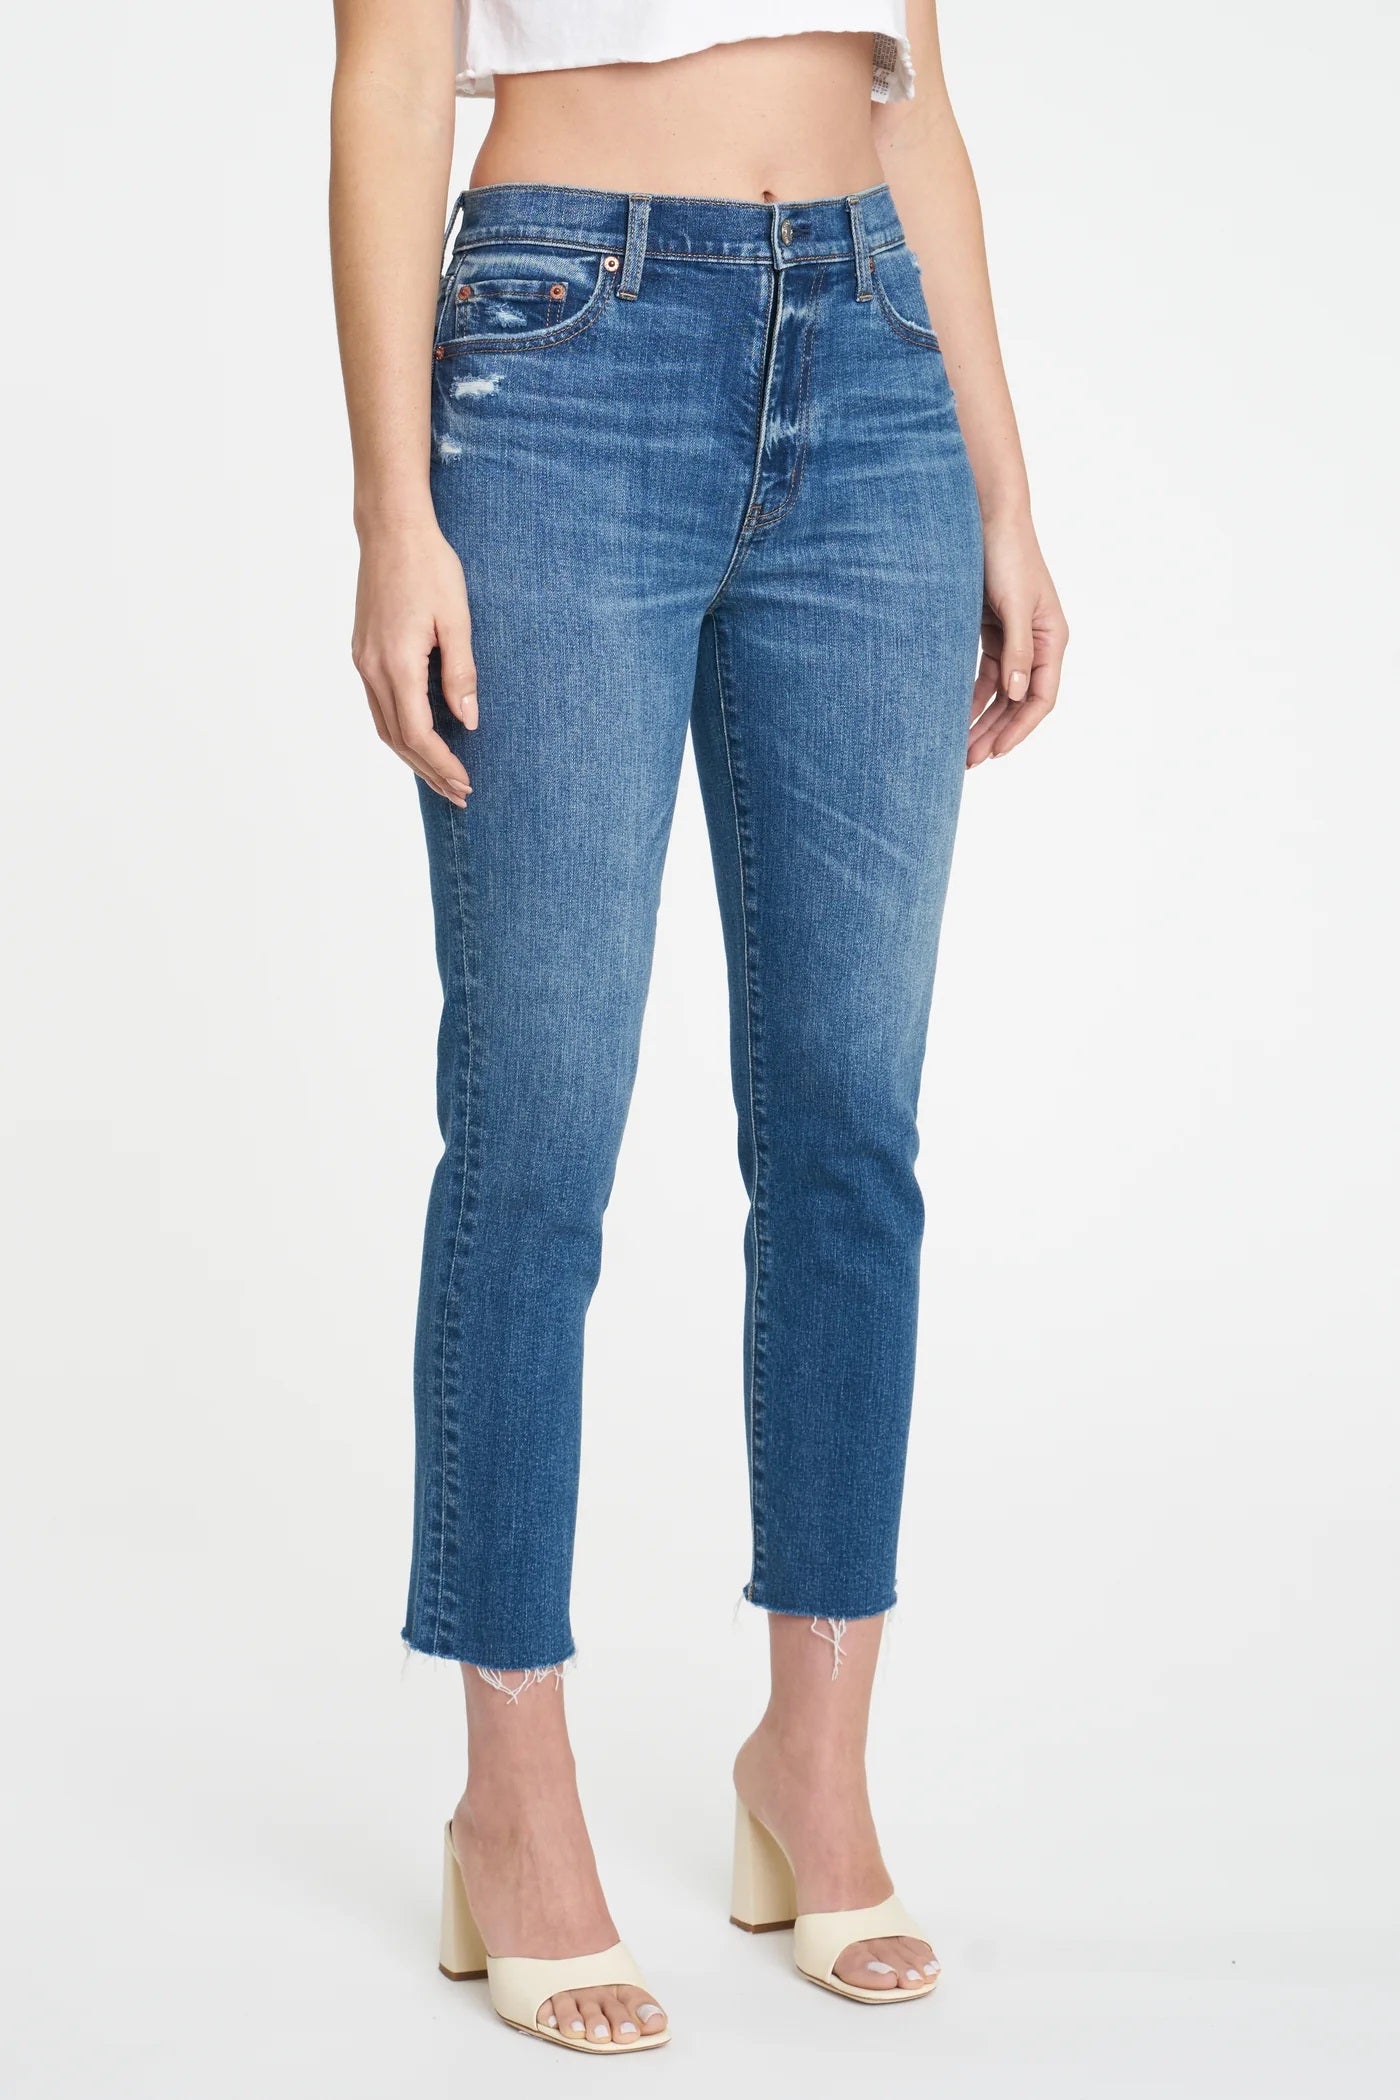 Daze, Daily Driver High Rise Skinny Straight in Kiss Me - Boutique Dandelion